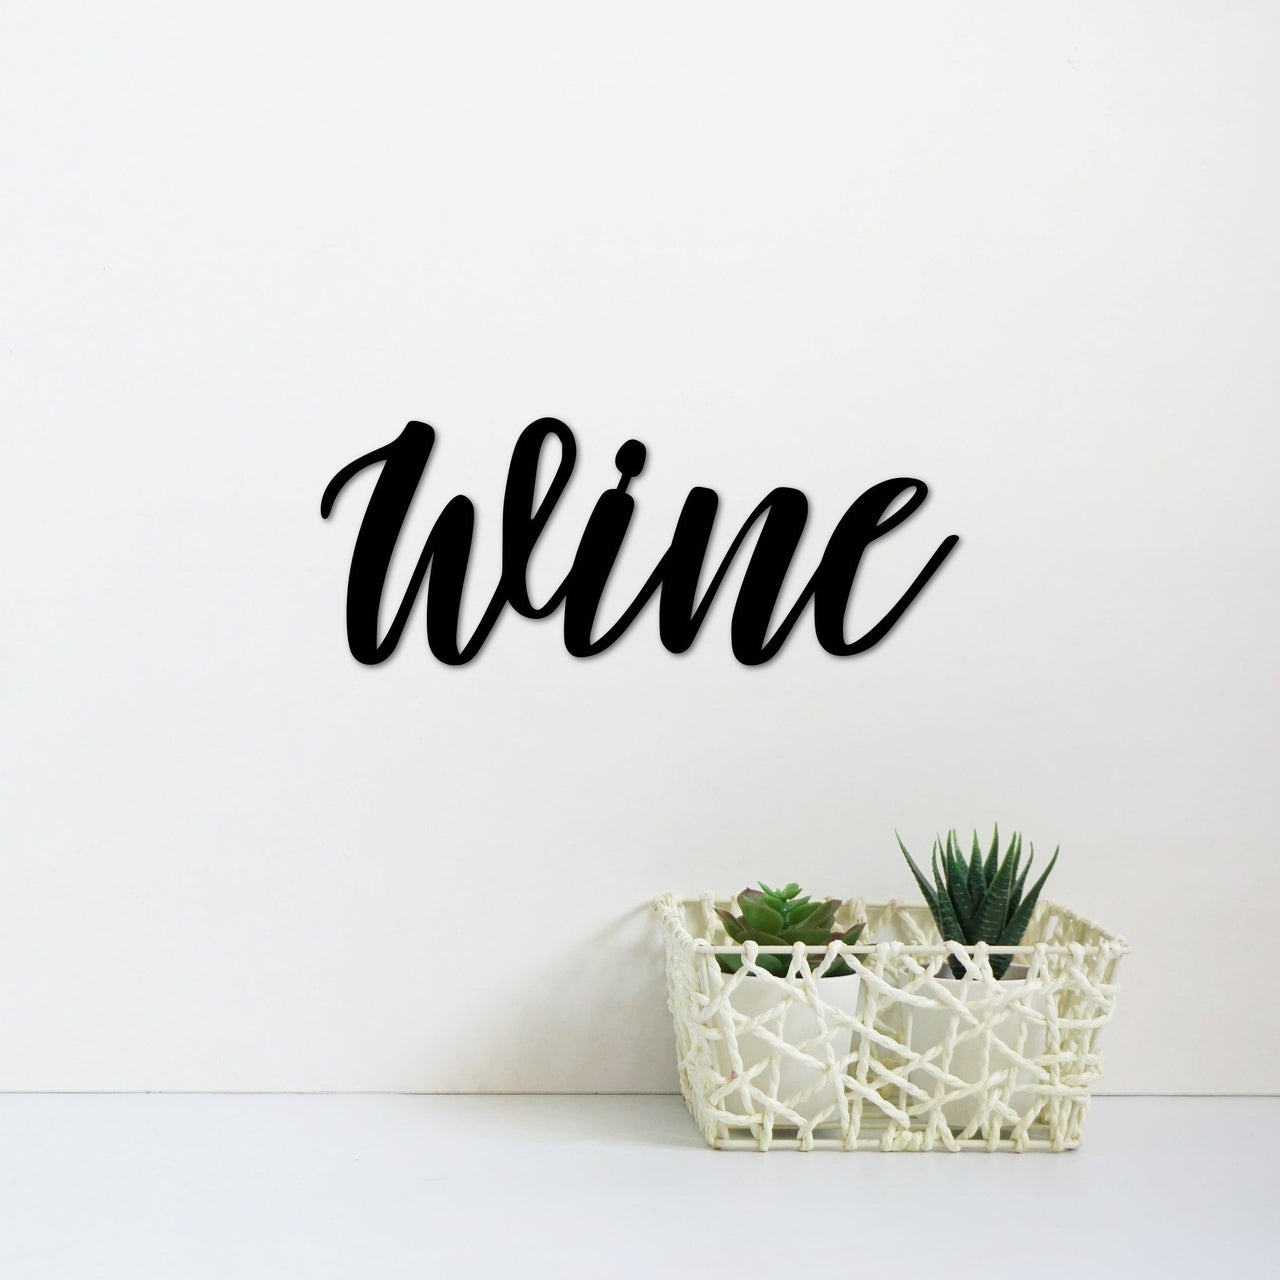 Metal Wine Sign | Wine Wall Word | Wine Decor for Wall | Kitchen Decor | Wine Lover Gift | Wine Word Art | Home Bar Sign | Metal Wall Art